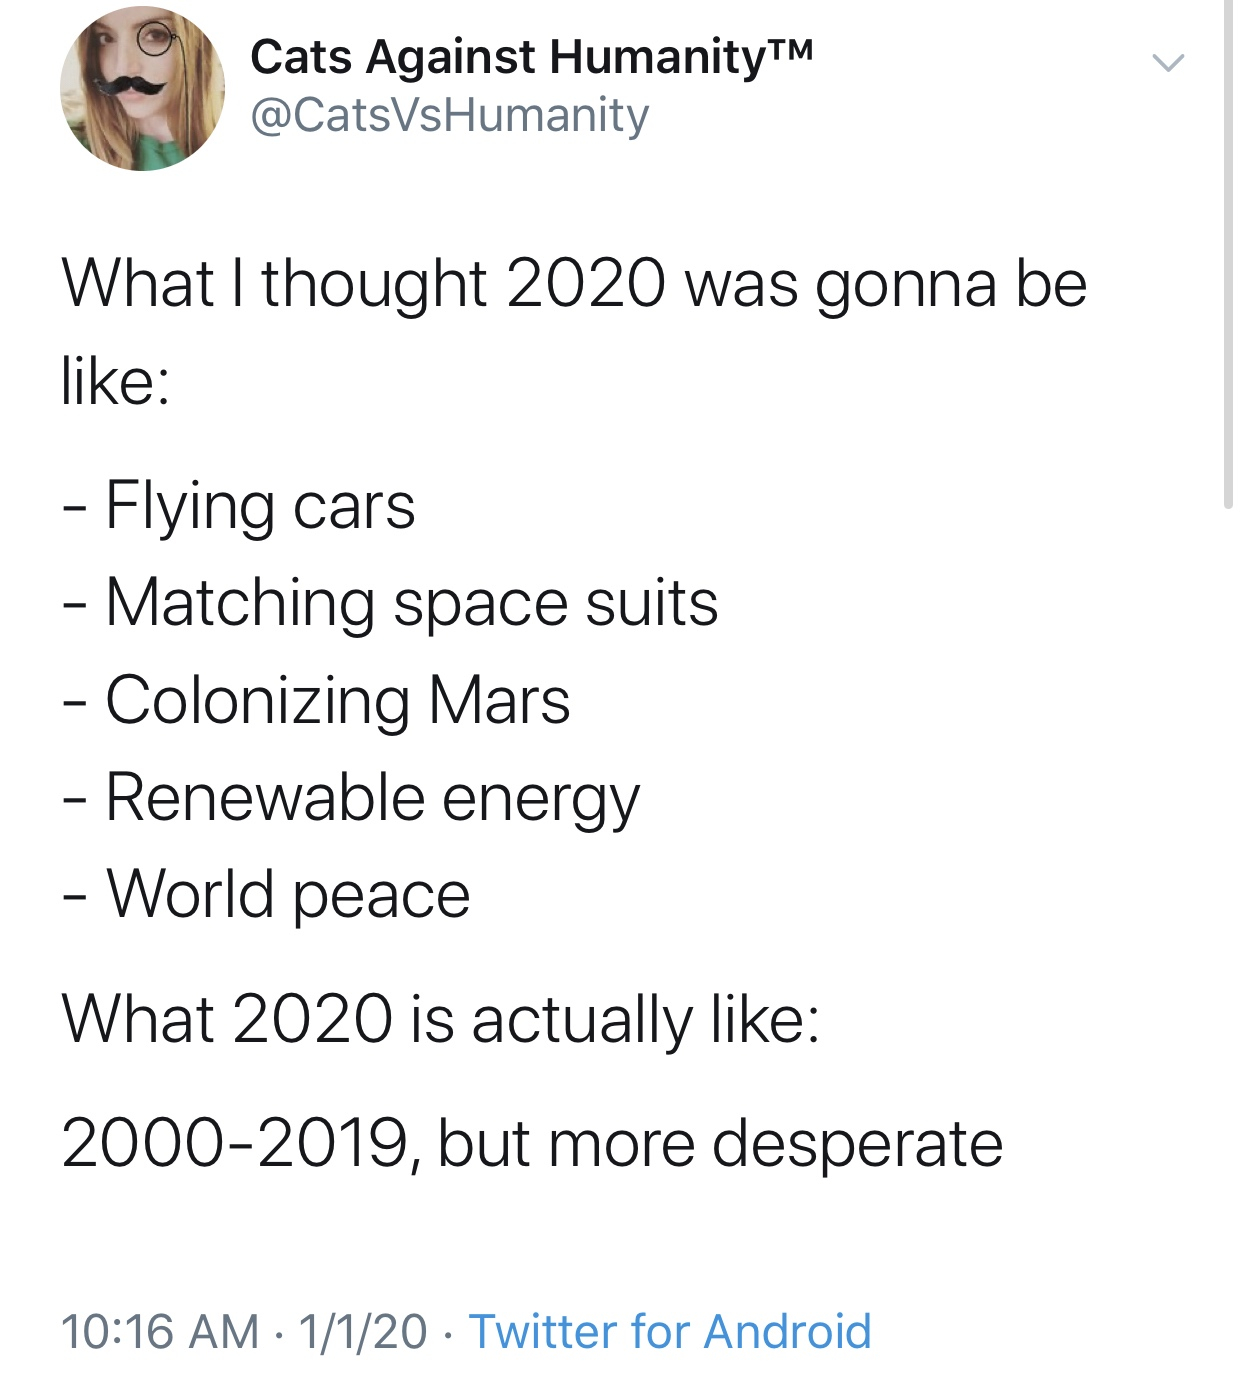 2020 memes - angle - Cats Against HumanityTM What I thought 2020 was gonna be Flying cars Matching space suits Colonizing Mars Renewable energy World peace What 2020 is actually 20002019, but more desperate 1120 Twitter for Android